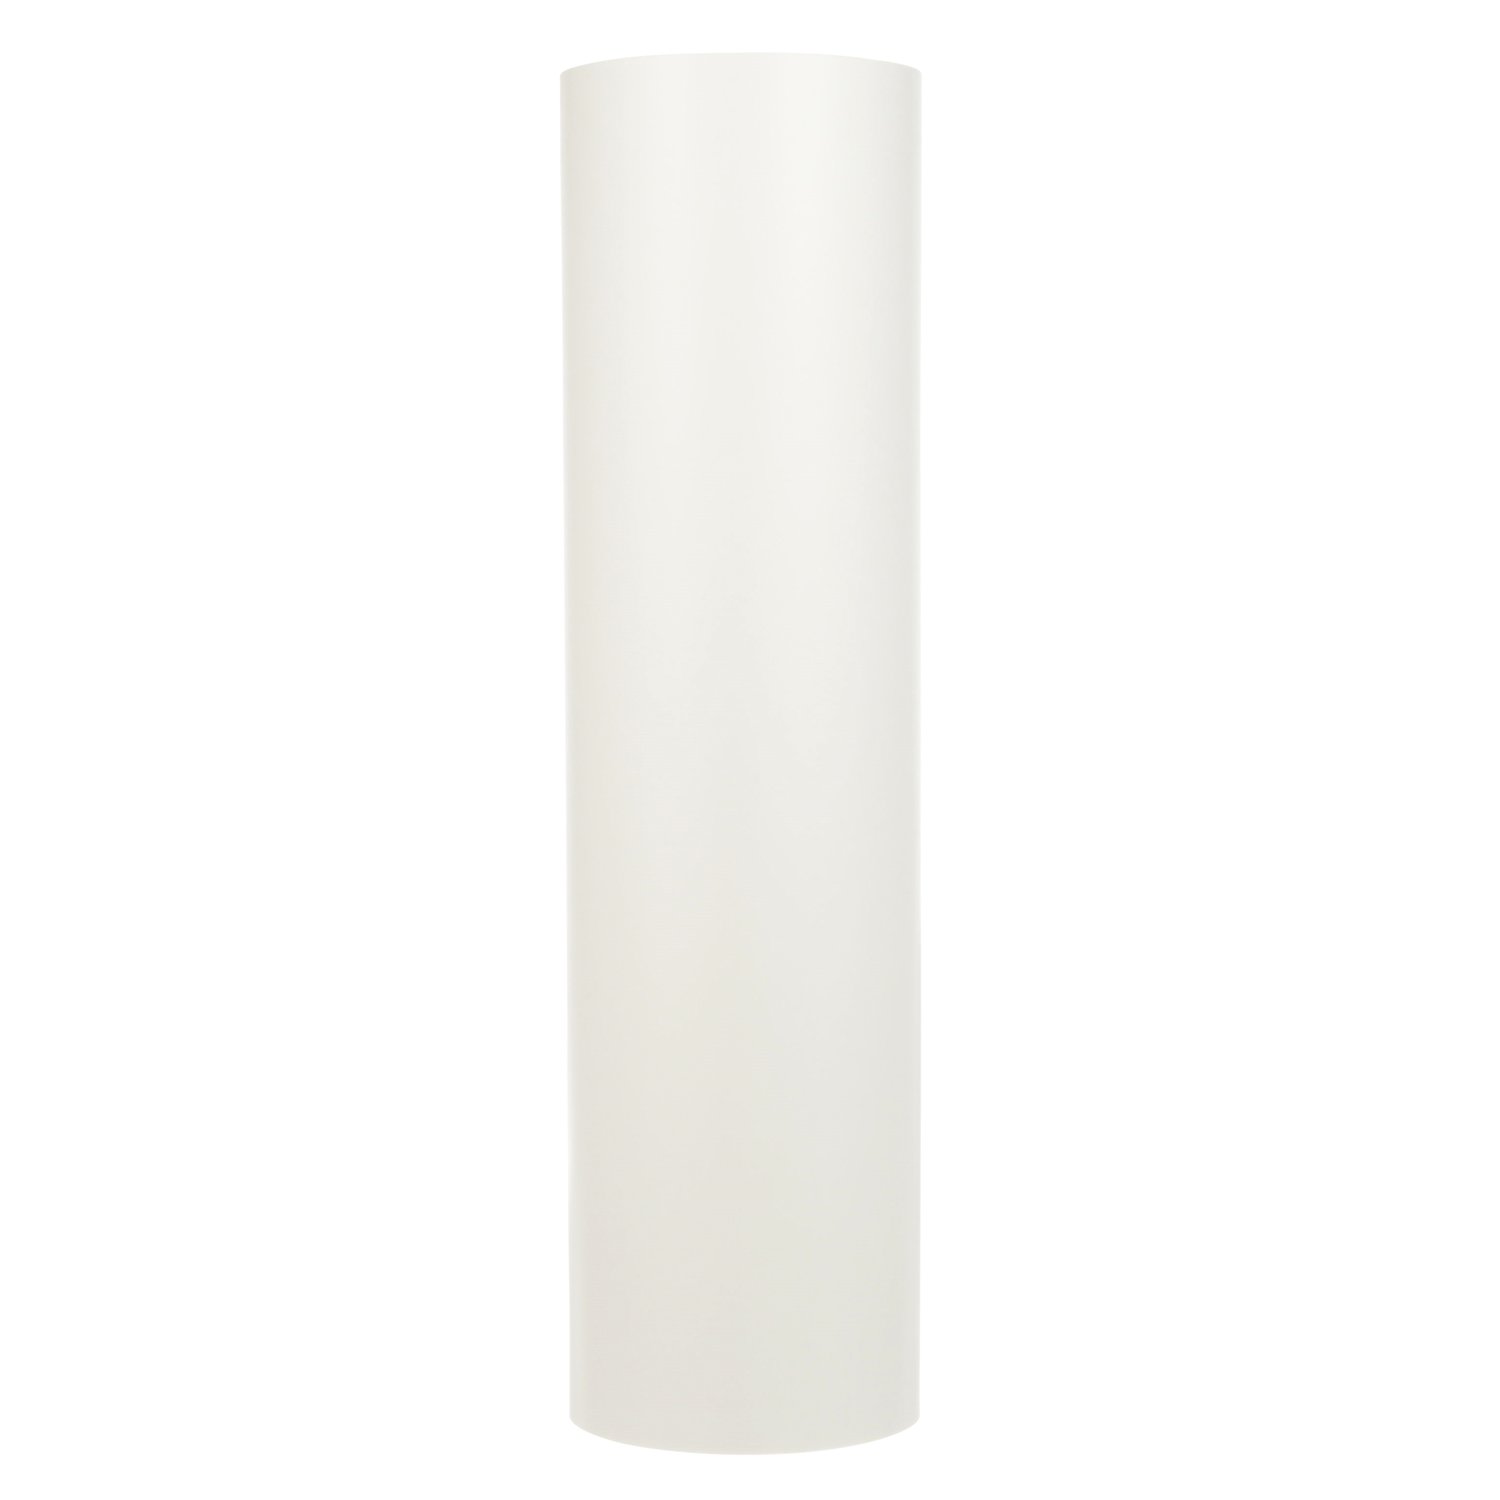 7010373794 - 3M Silicone Secondary Release Liner 4997, White, 48 in X 180 yd, 4 mil,
1 roll per case